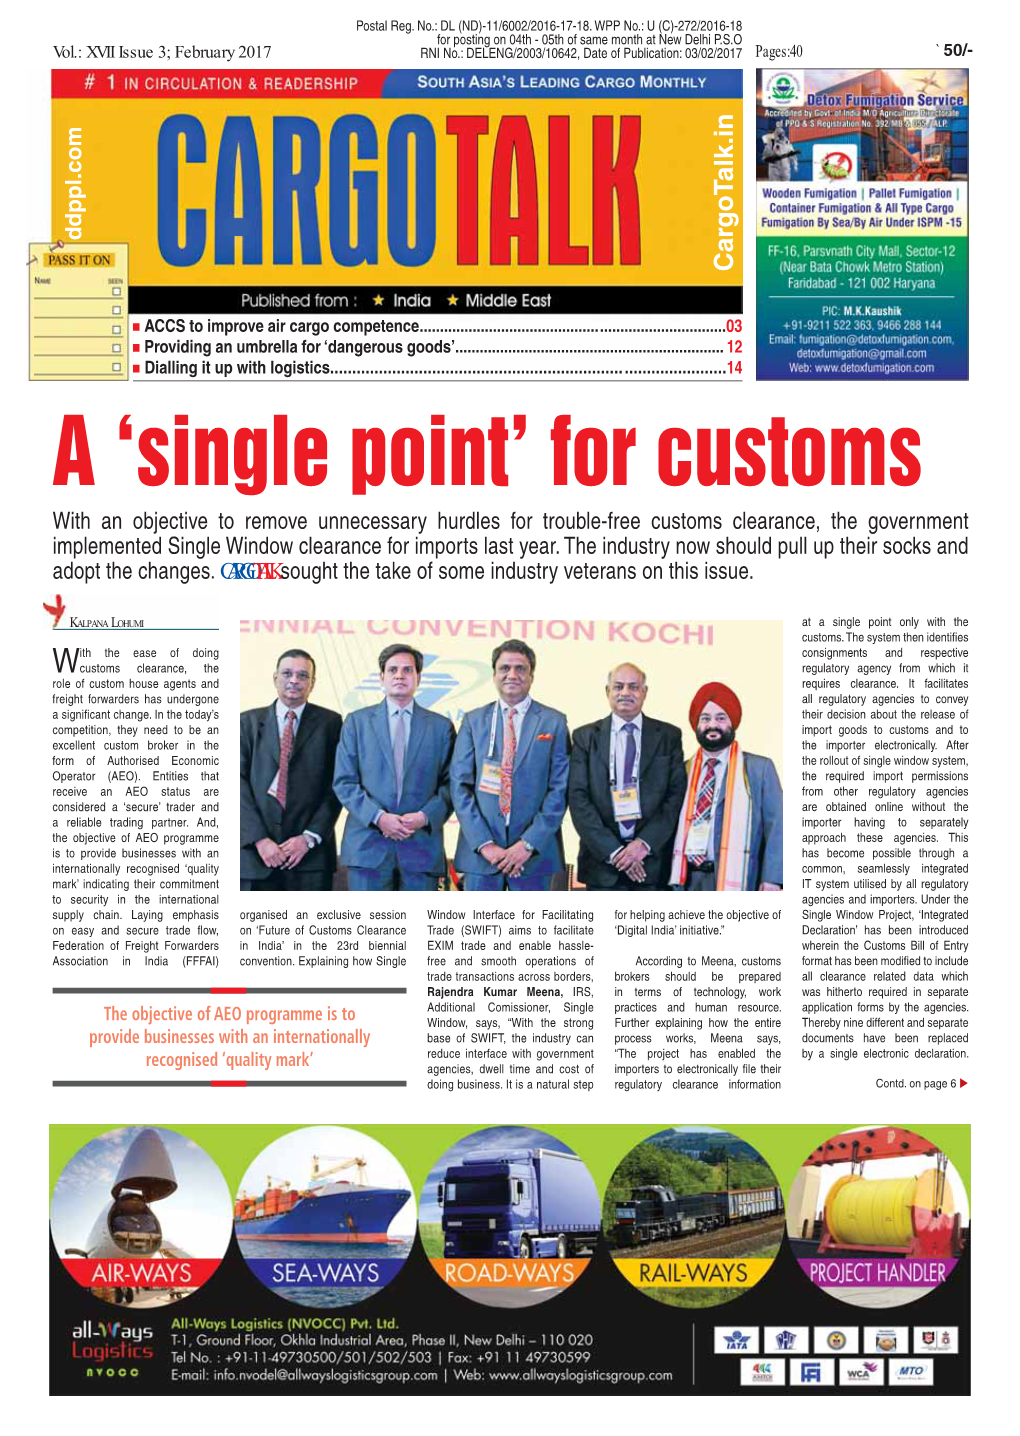 Shipping Substantially Boost Exports in Just These Movement of Cargo Among Others.” with the Aim to Create One Single and a K Bhalla, Director General of Sectors